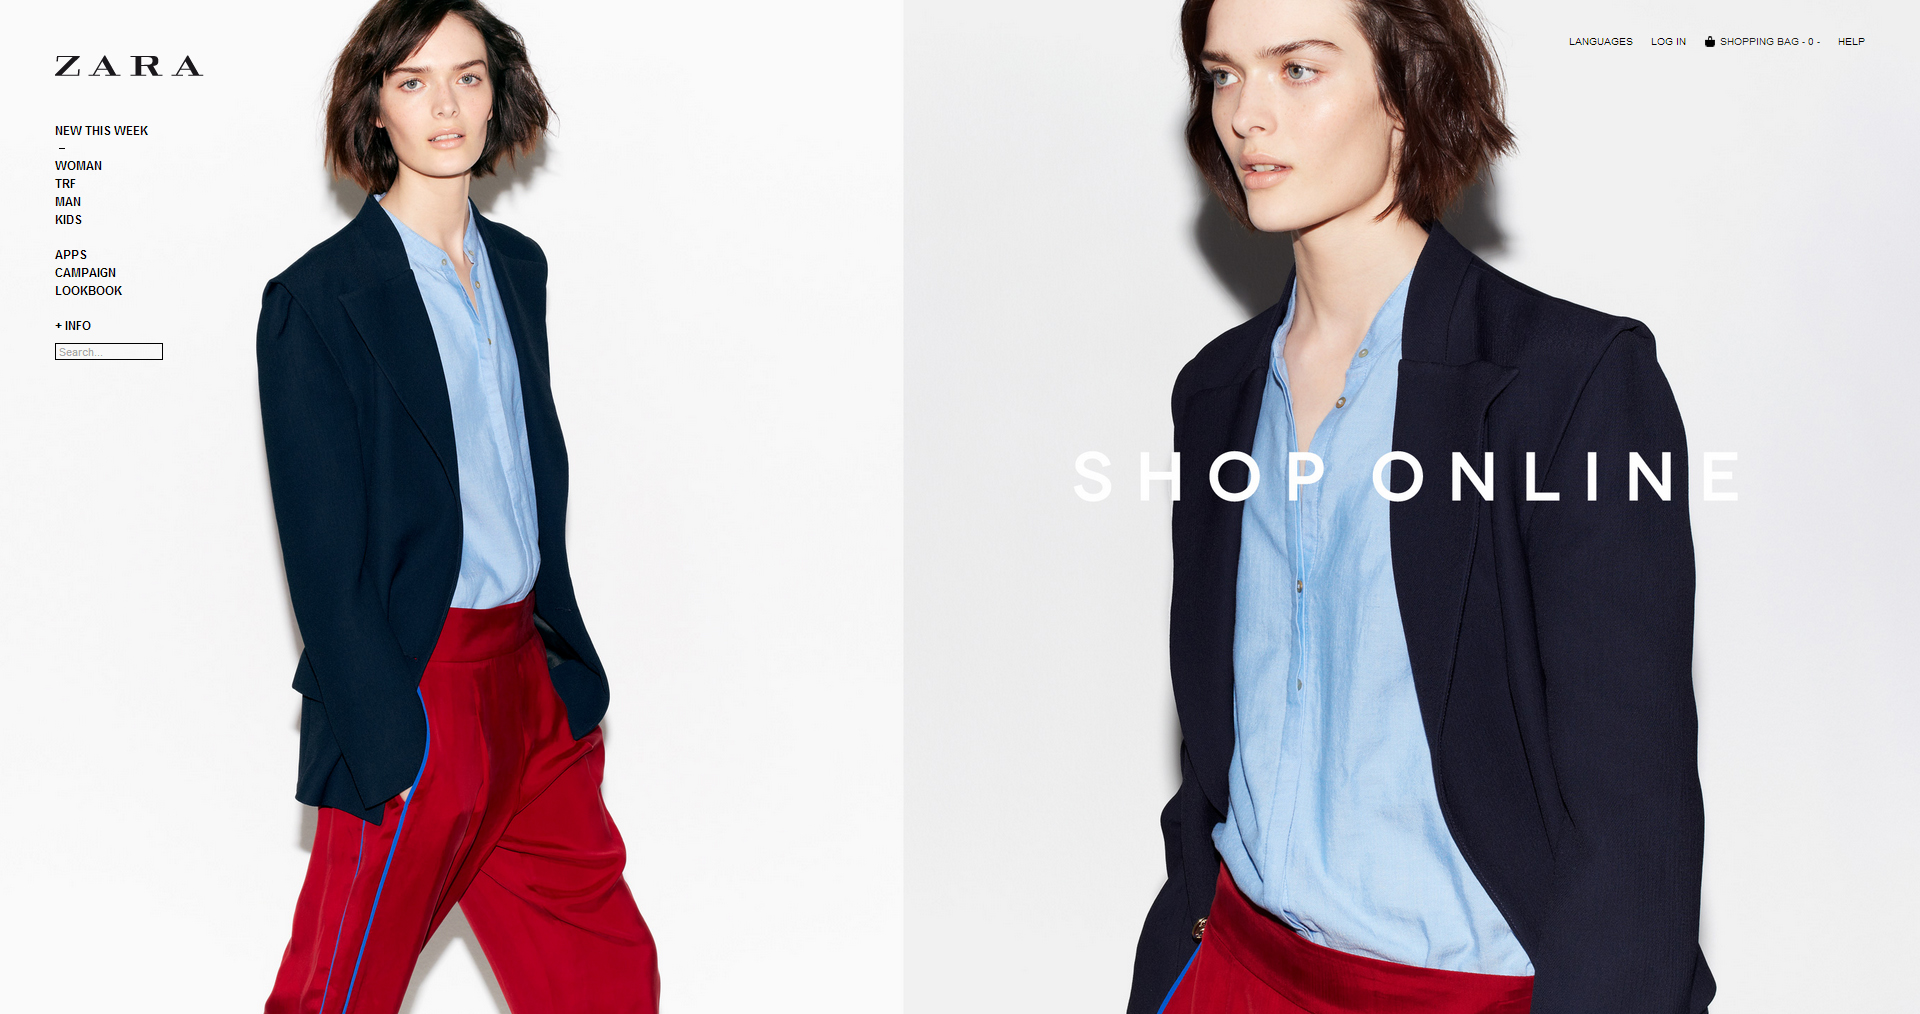 The day is herrrrrrrre! Zara launches their Canadian e-commerce site ...